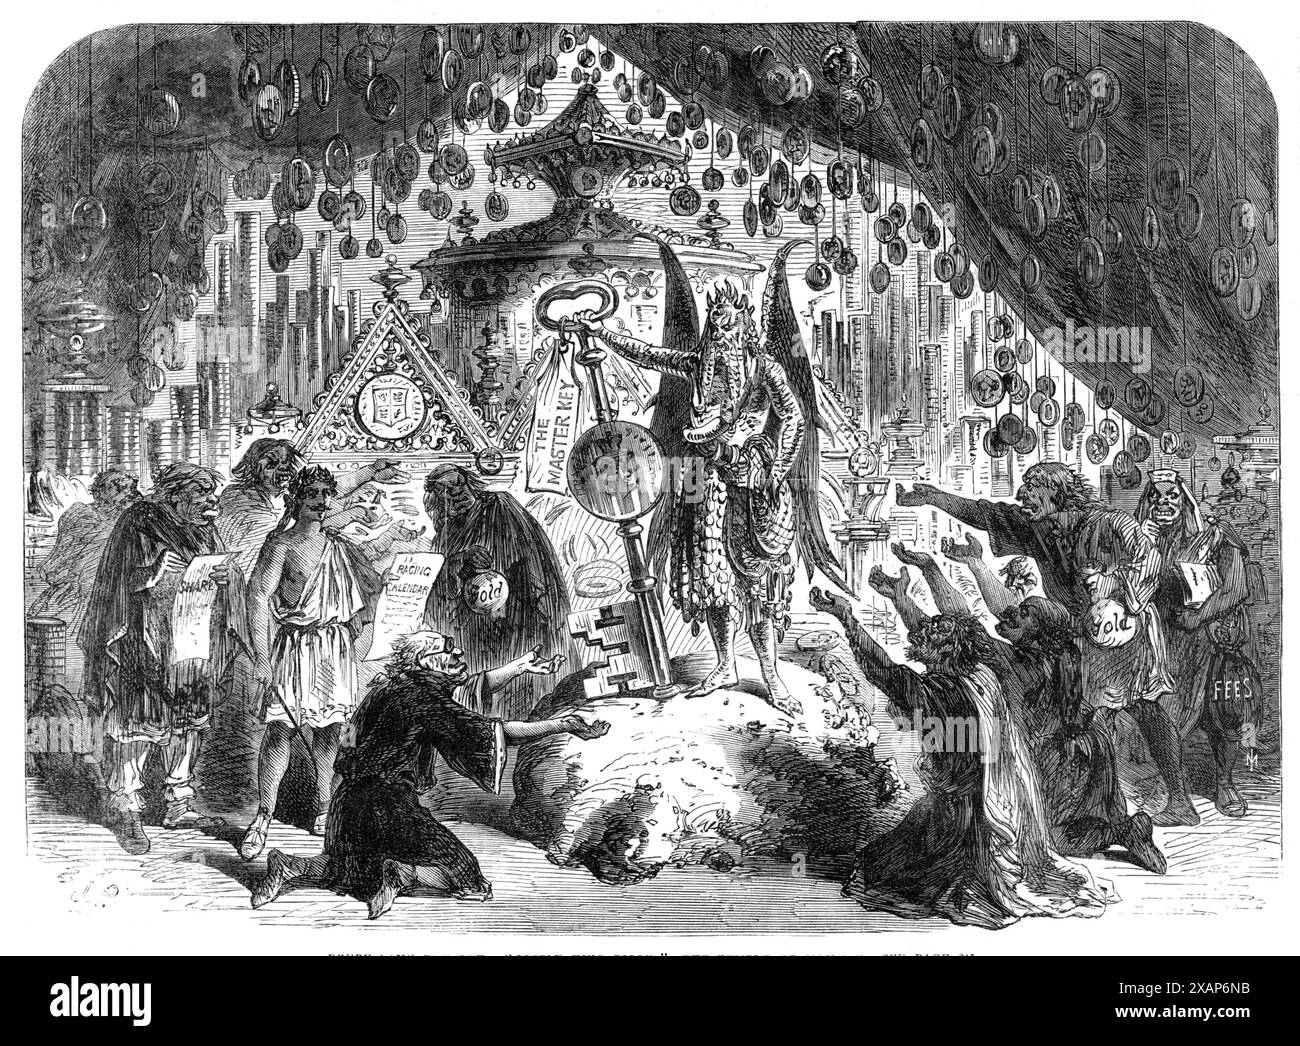 Scenes from the Christmas pantomimes: Drury Lane Theatre: &quot;Little King Pippin&quot; - the Temple of Mammon, 1865. London stage production of &quot;Little King Pippin; or, Harlequin Fortunatus and the Magic Purse and Wishing-Cap.&quot; 'Messrs. Falconer and Chatterton are reported to have expended a mint of money on its representation...The induction opens with the Temple of Mammon,...the dirty deity himself being rather too majestically represented by Mr. Henri Drayton, who supplies Fortune with the inexhaustible purse, which, ultimately, she bestows on Fortunatus (Miss Augusta Thompson). Stock Photo